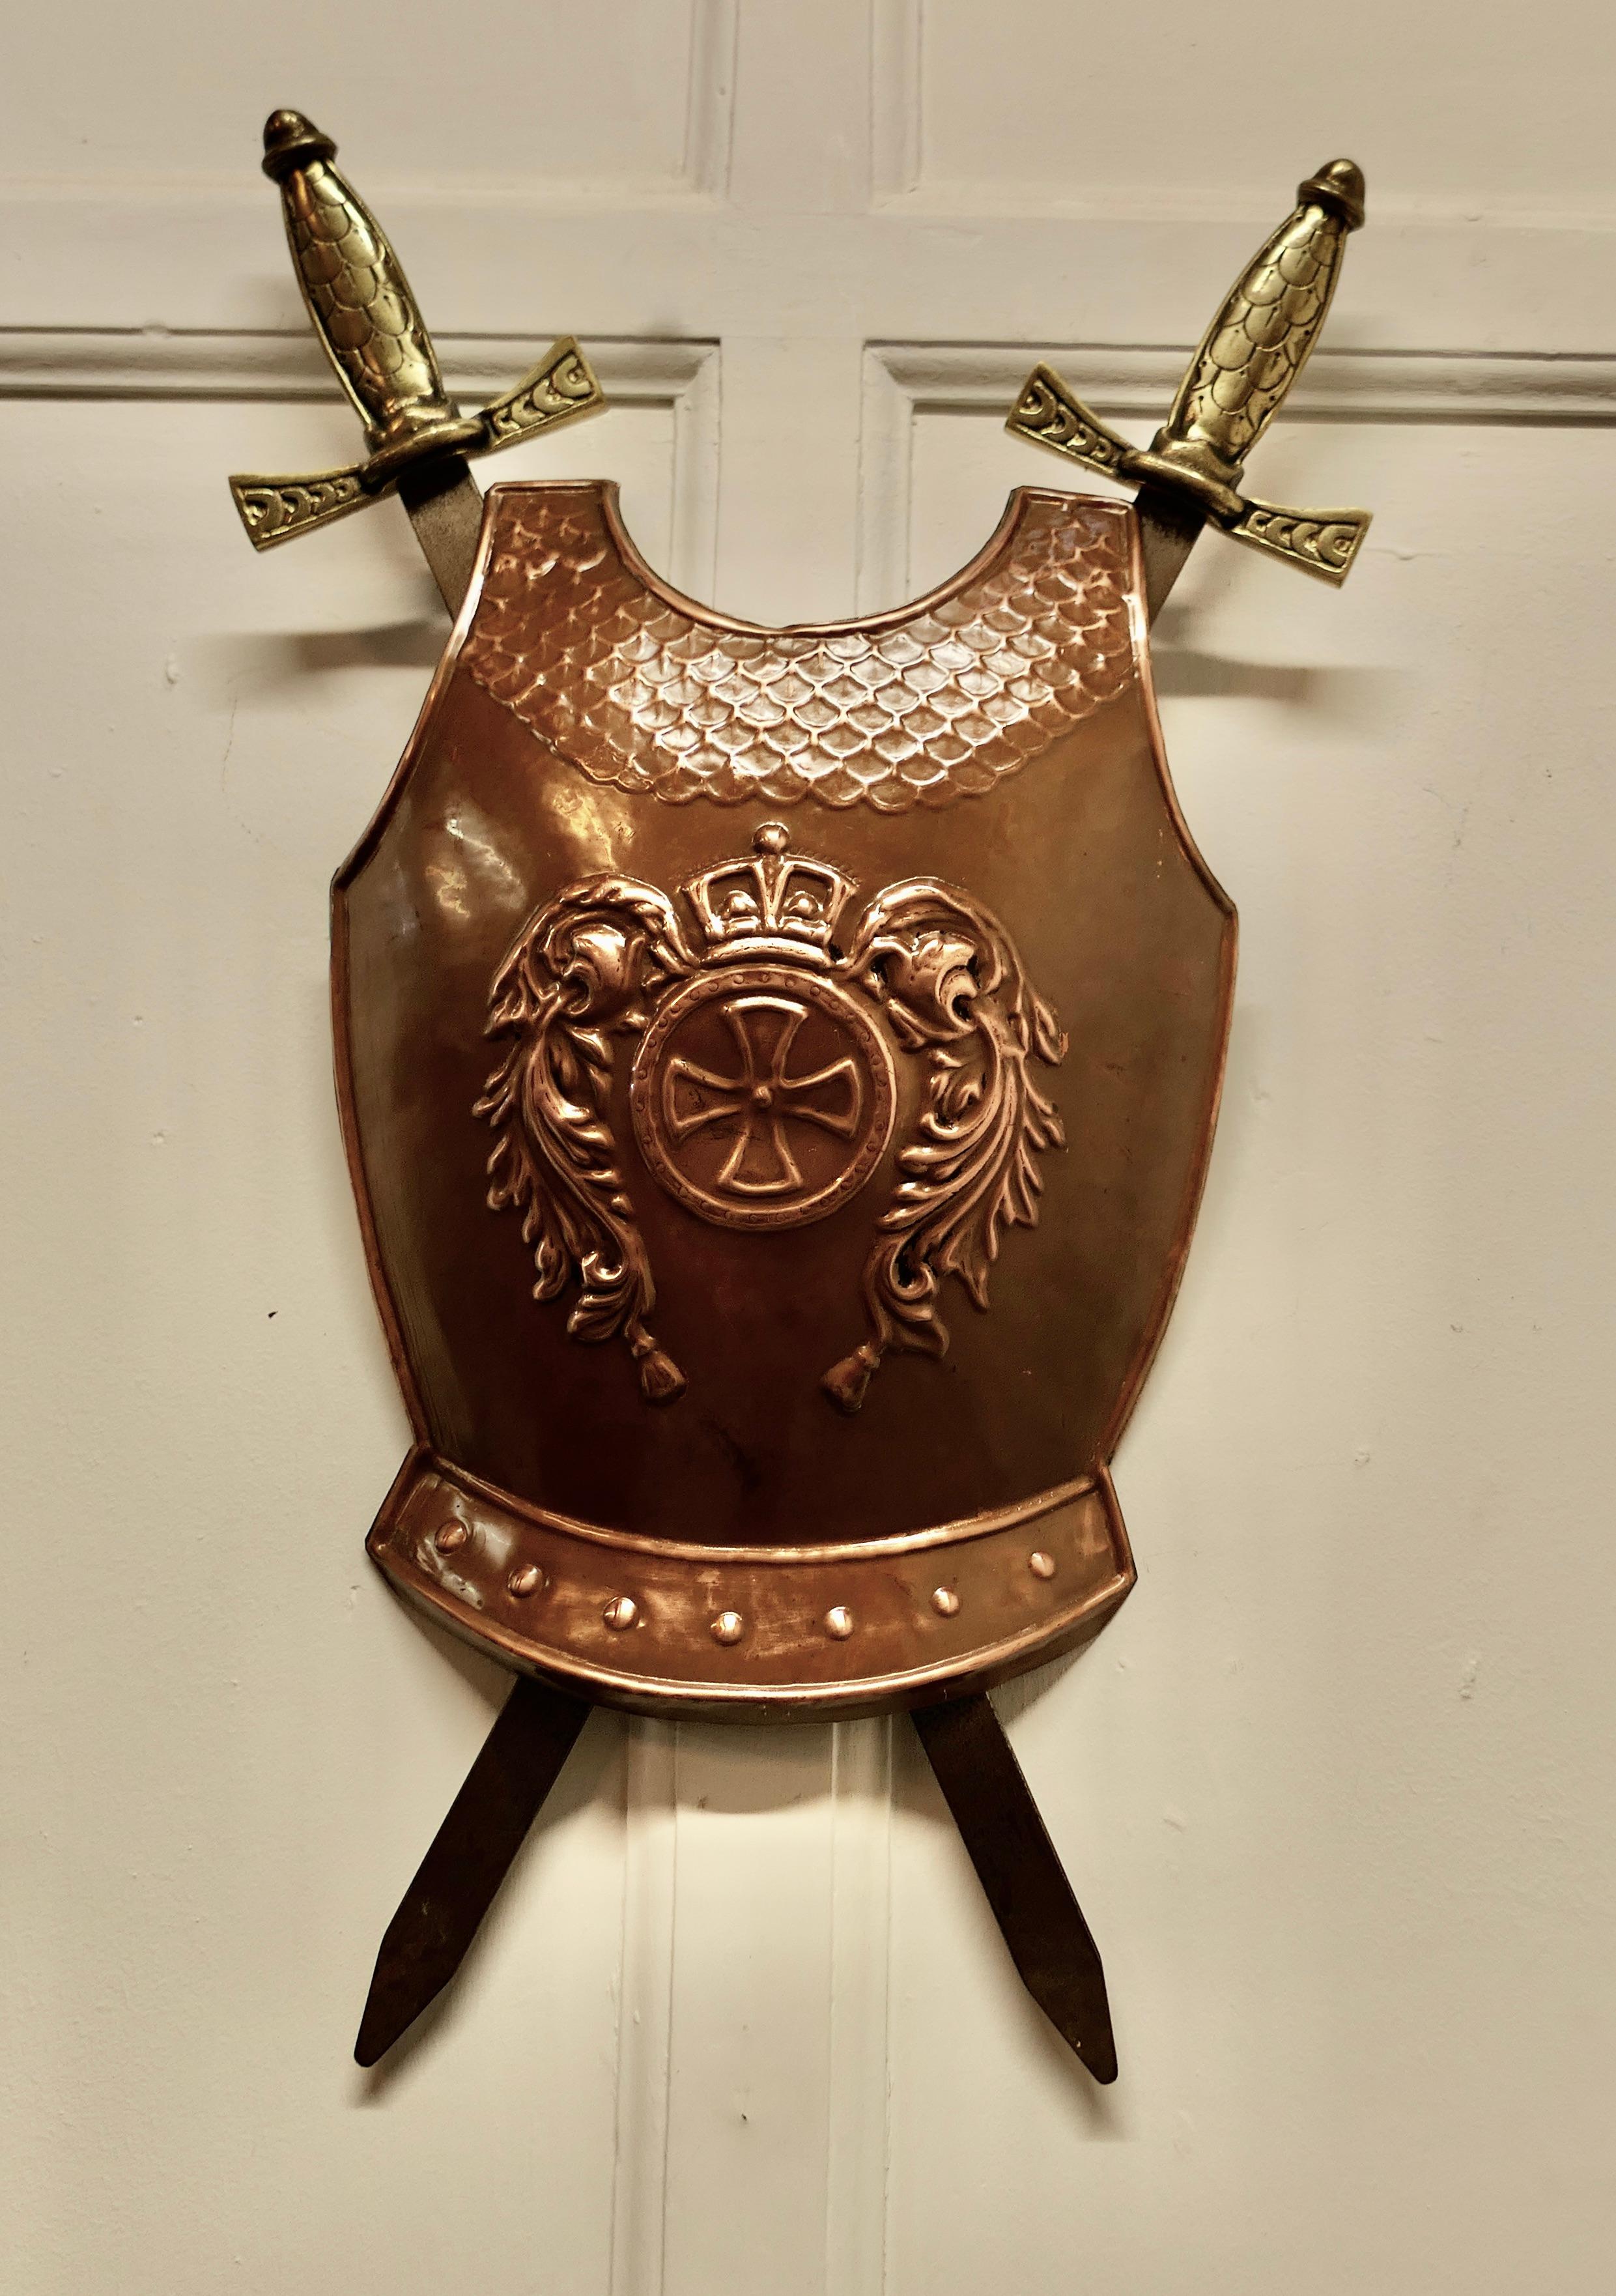 Wall hanging Arts and Crafts copper breast plate shield with cross swords 

A Large Decorative wall piece the copper is hand beaten and has a Cross with Crown over
The swords are held in the back but not removable, a good looking piece of